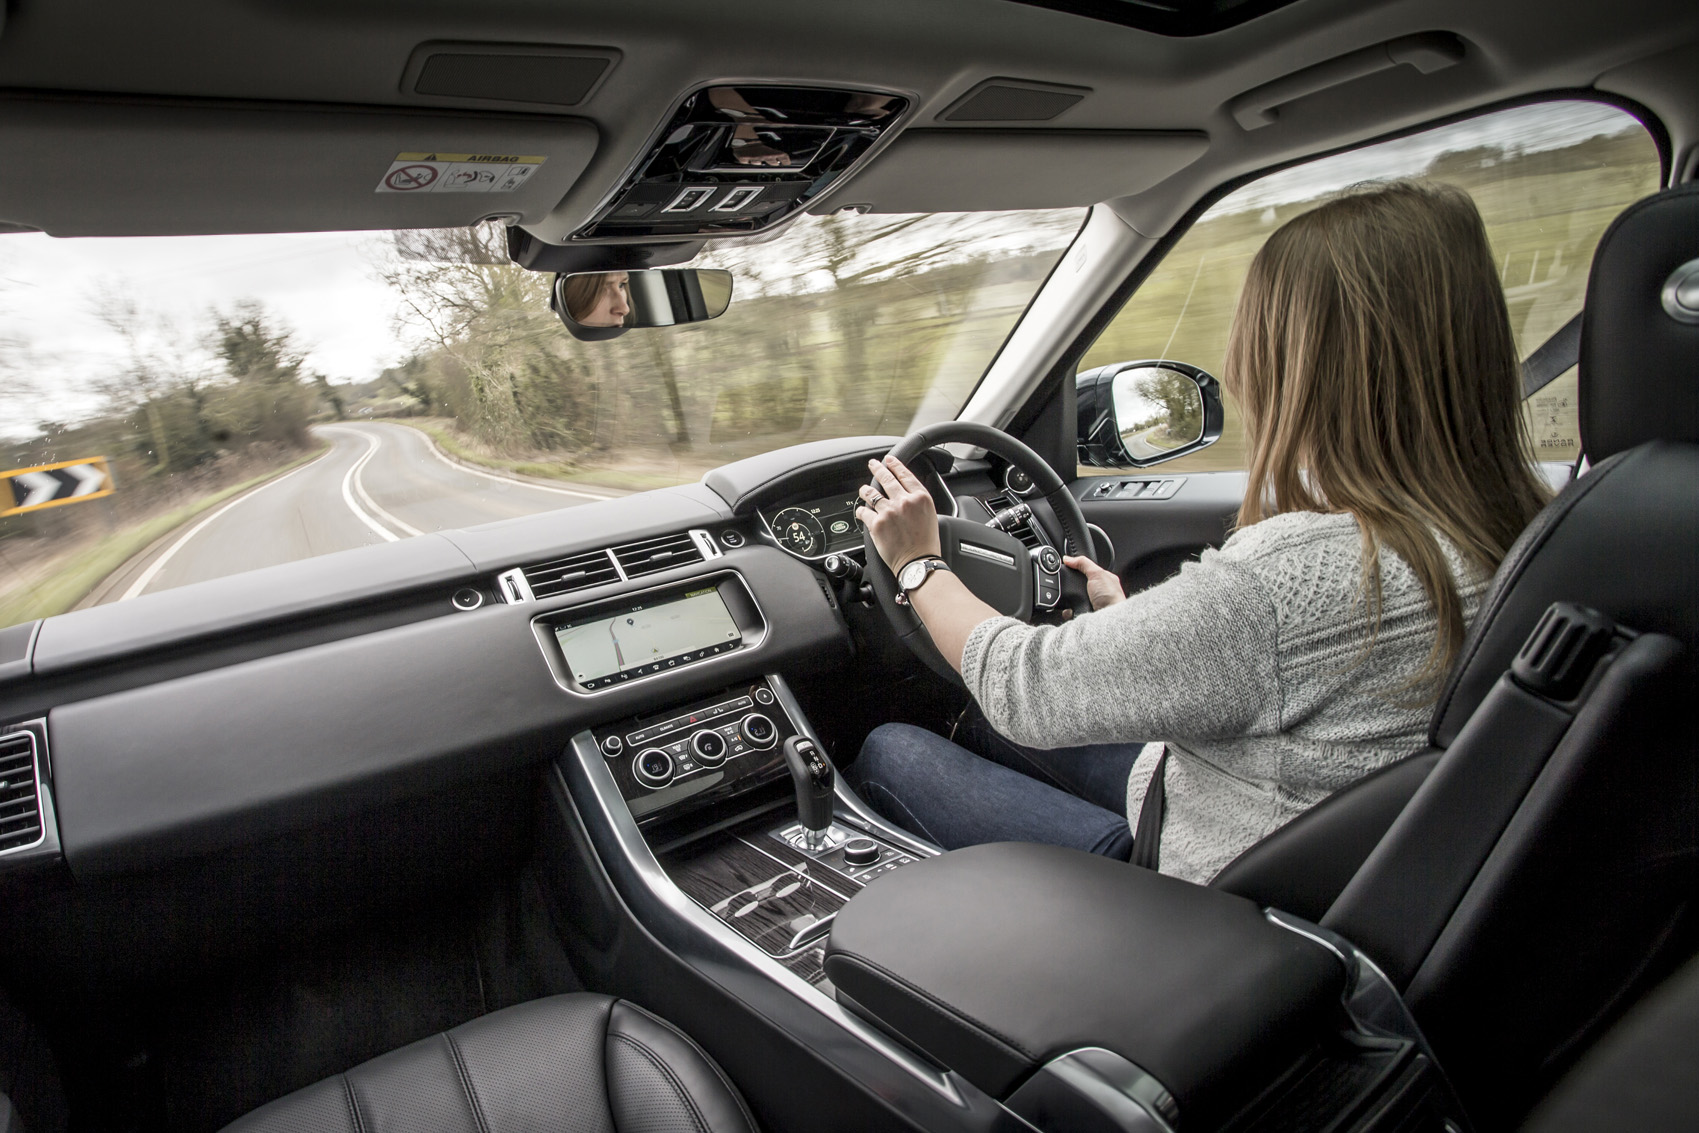 Driving the Range Rover Sport